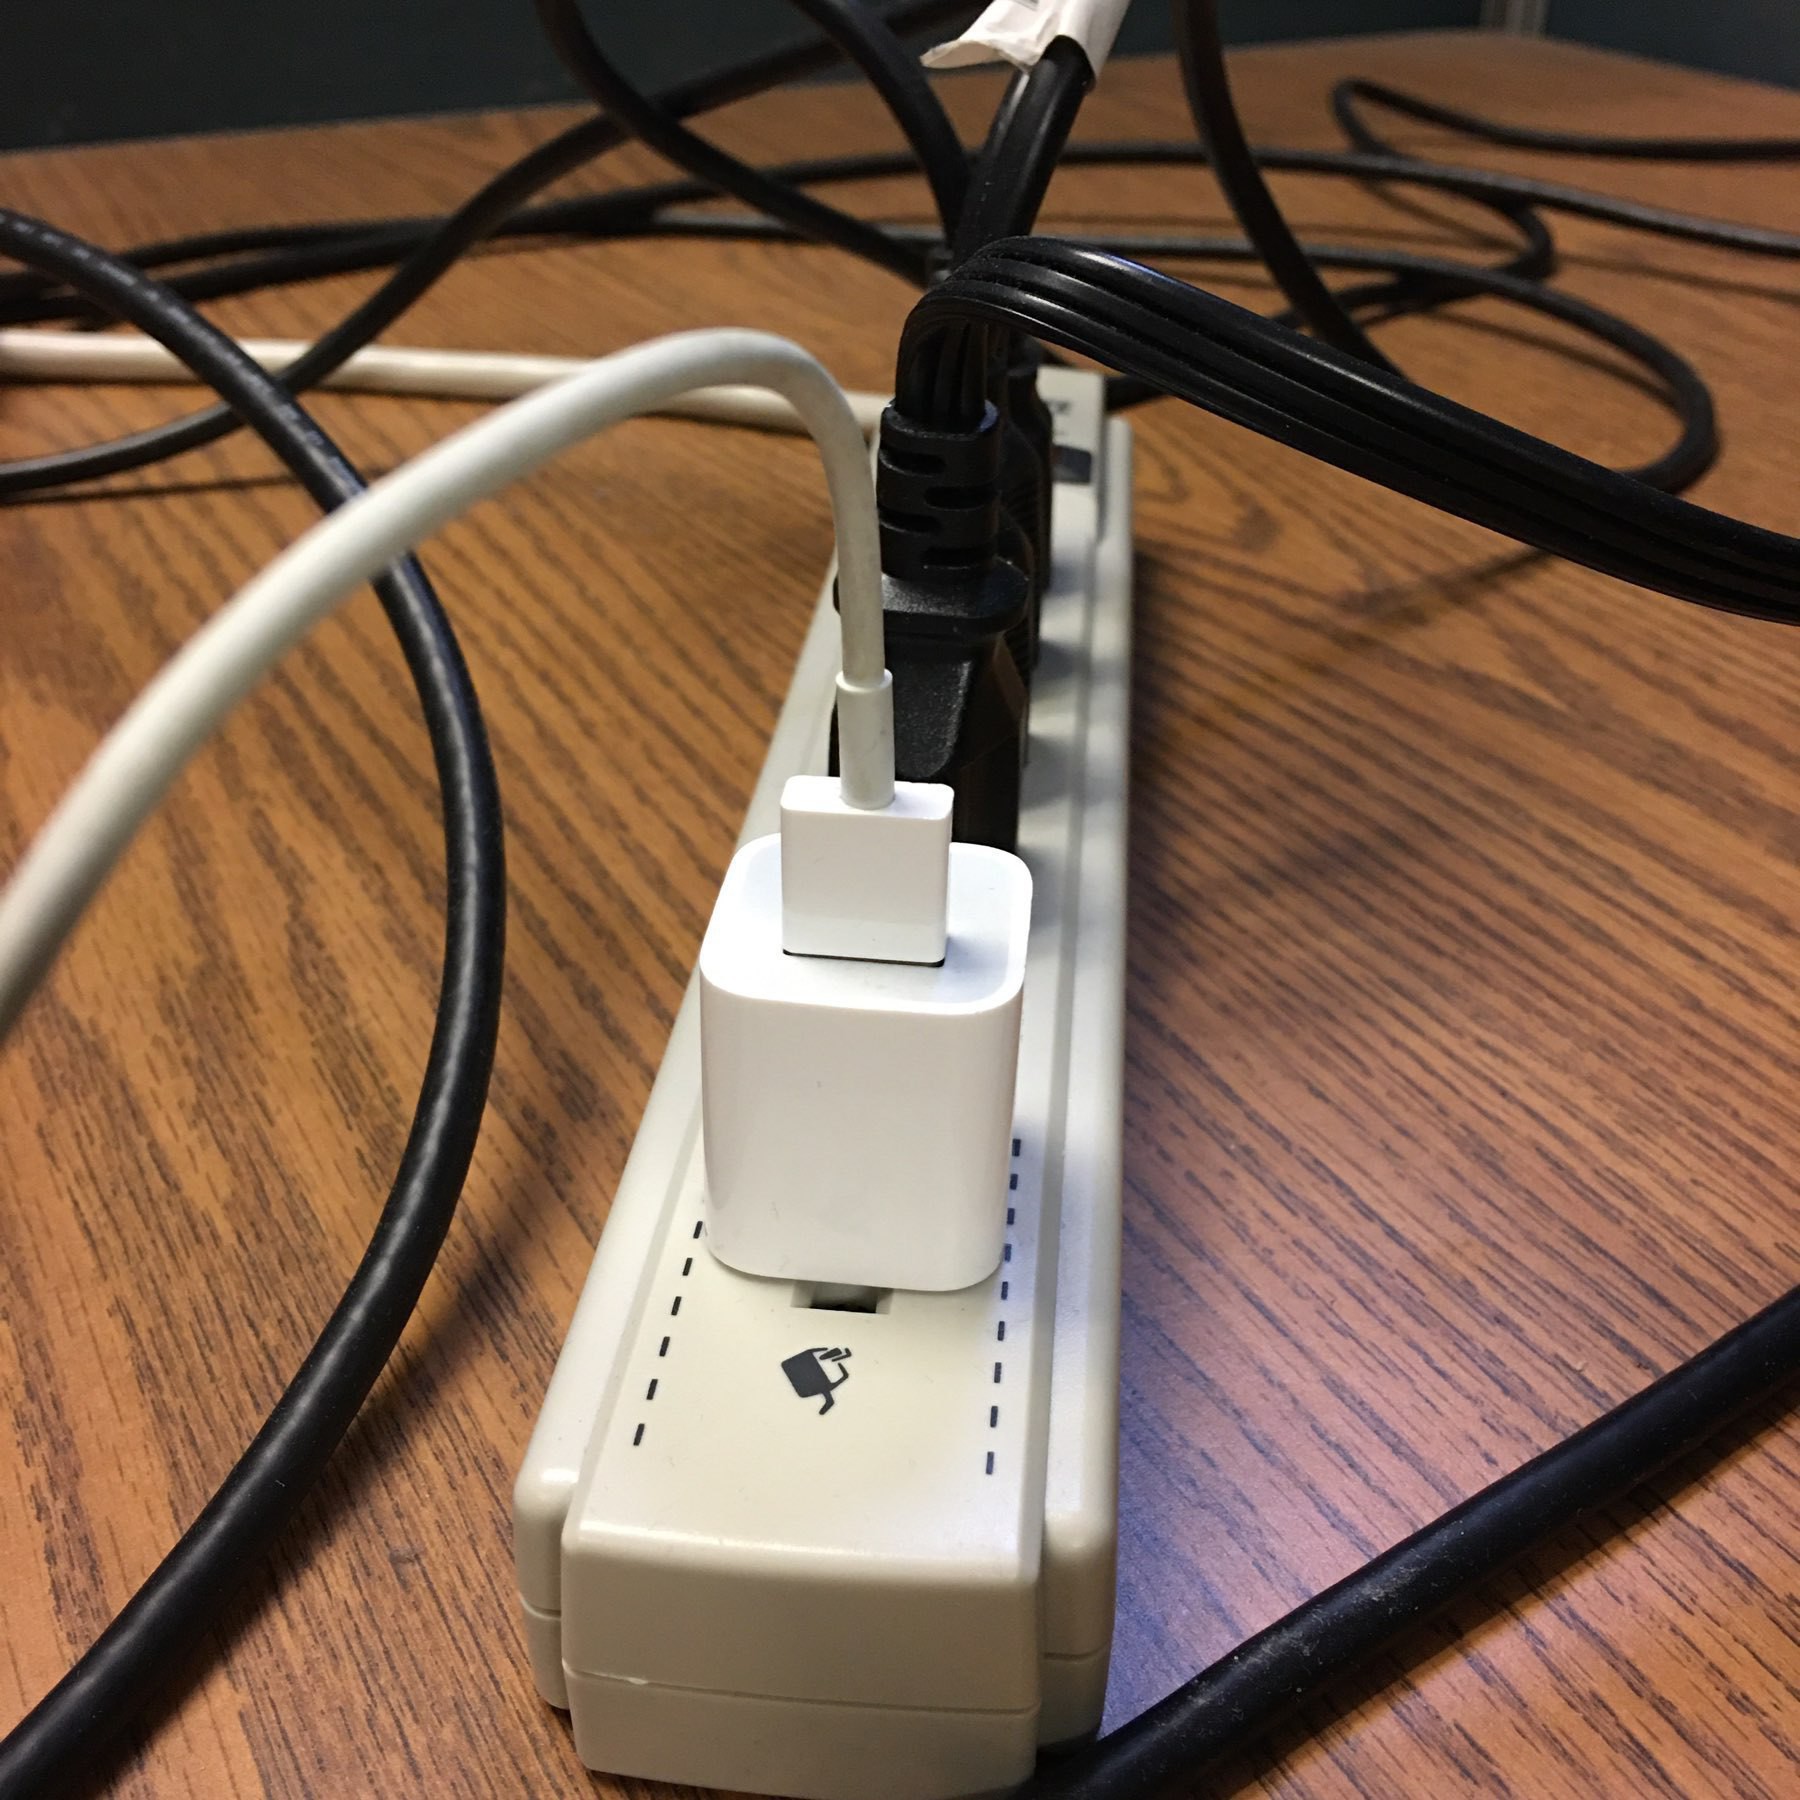 Lightining cable connected to a power brick and extension cord. 